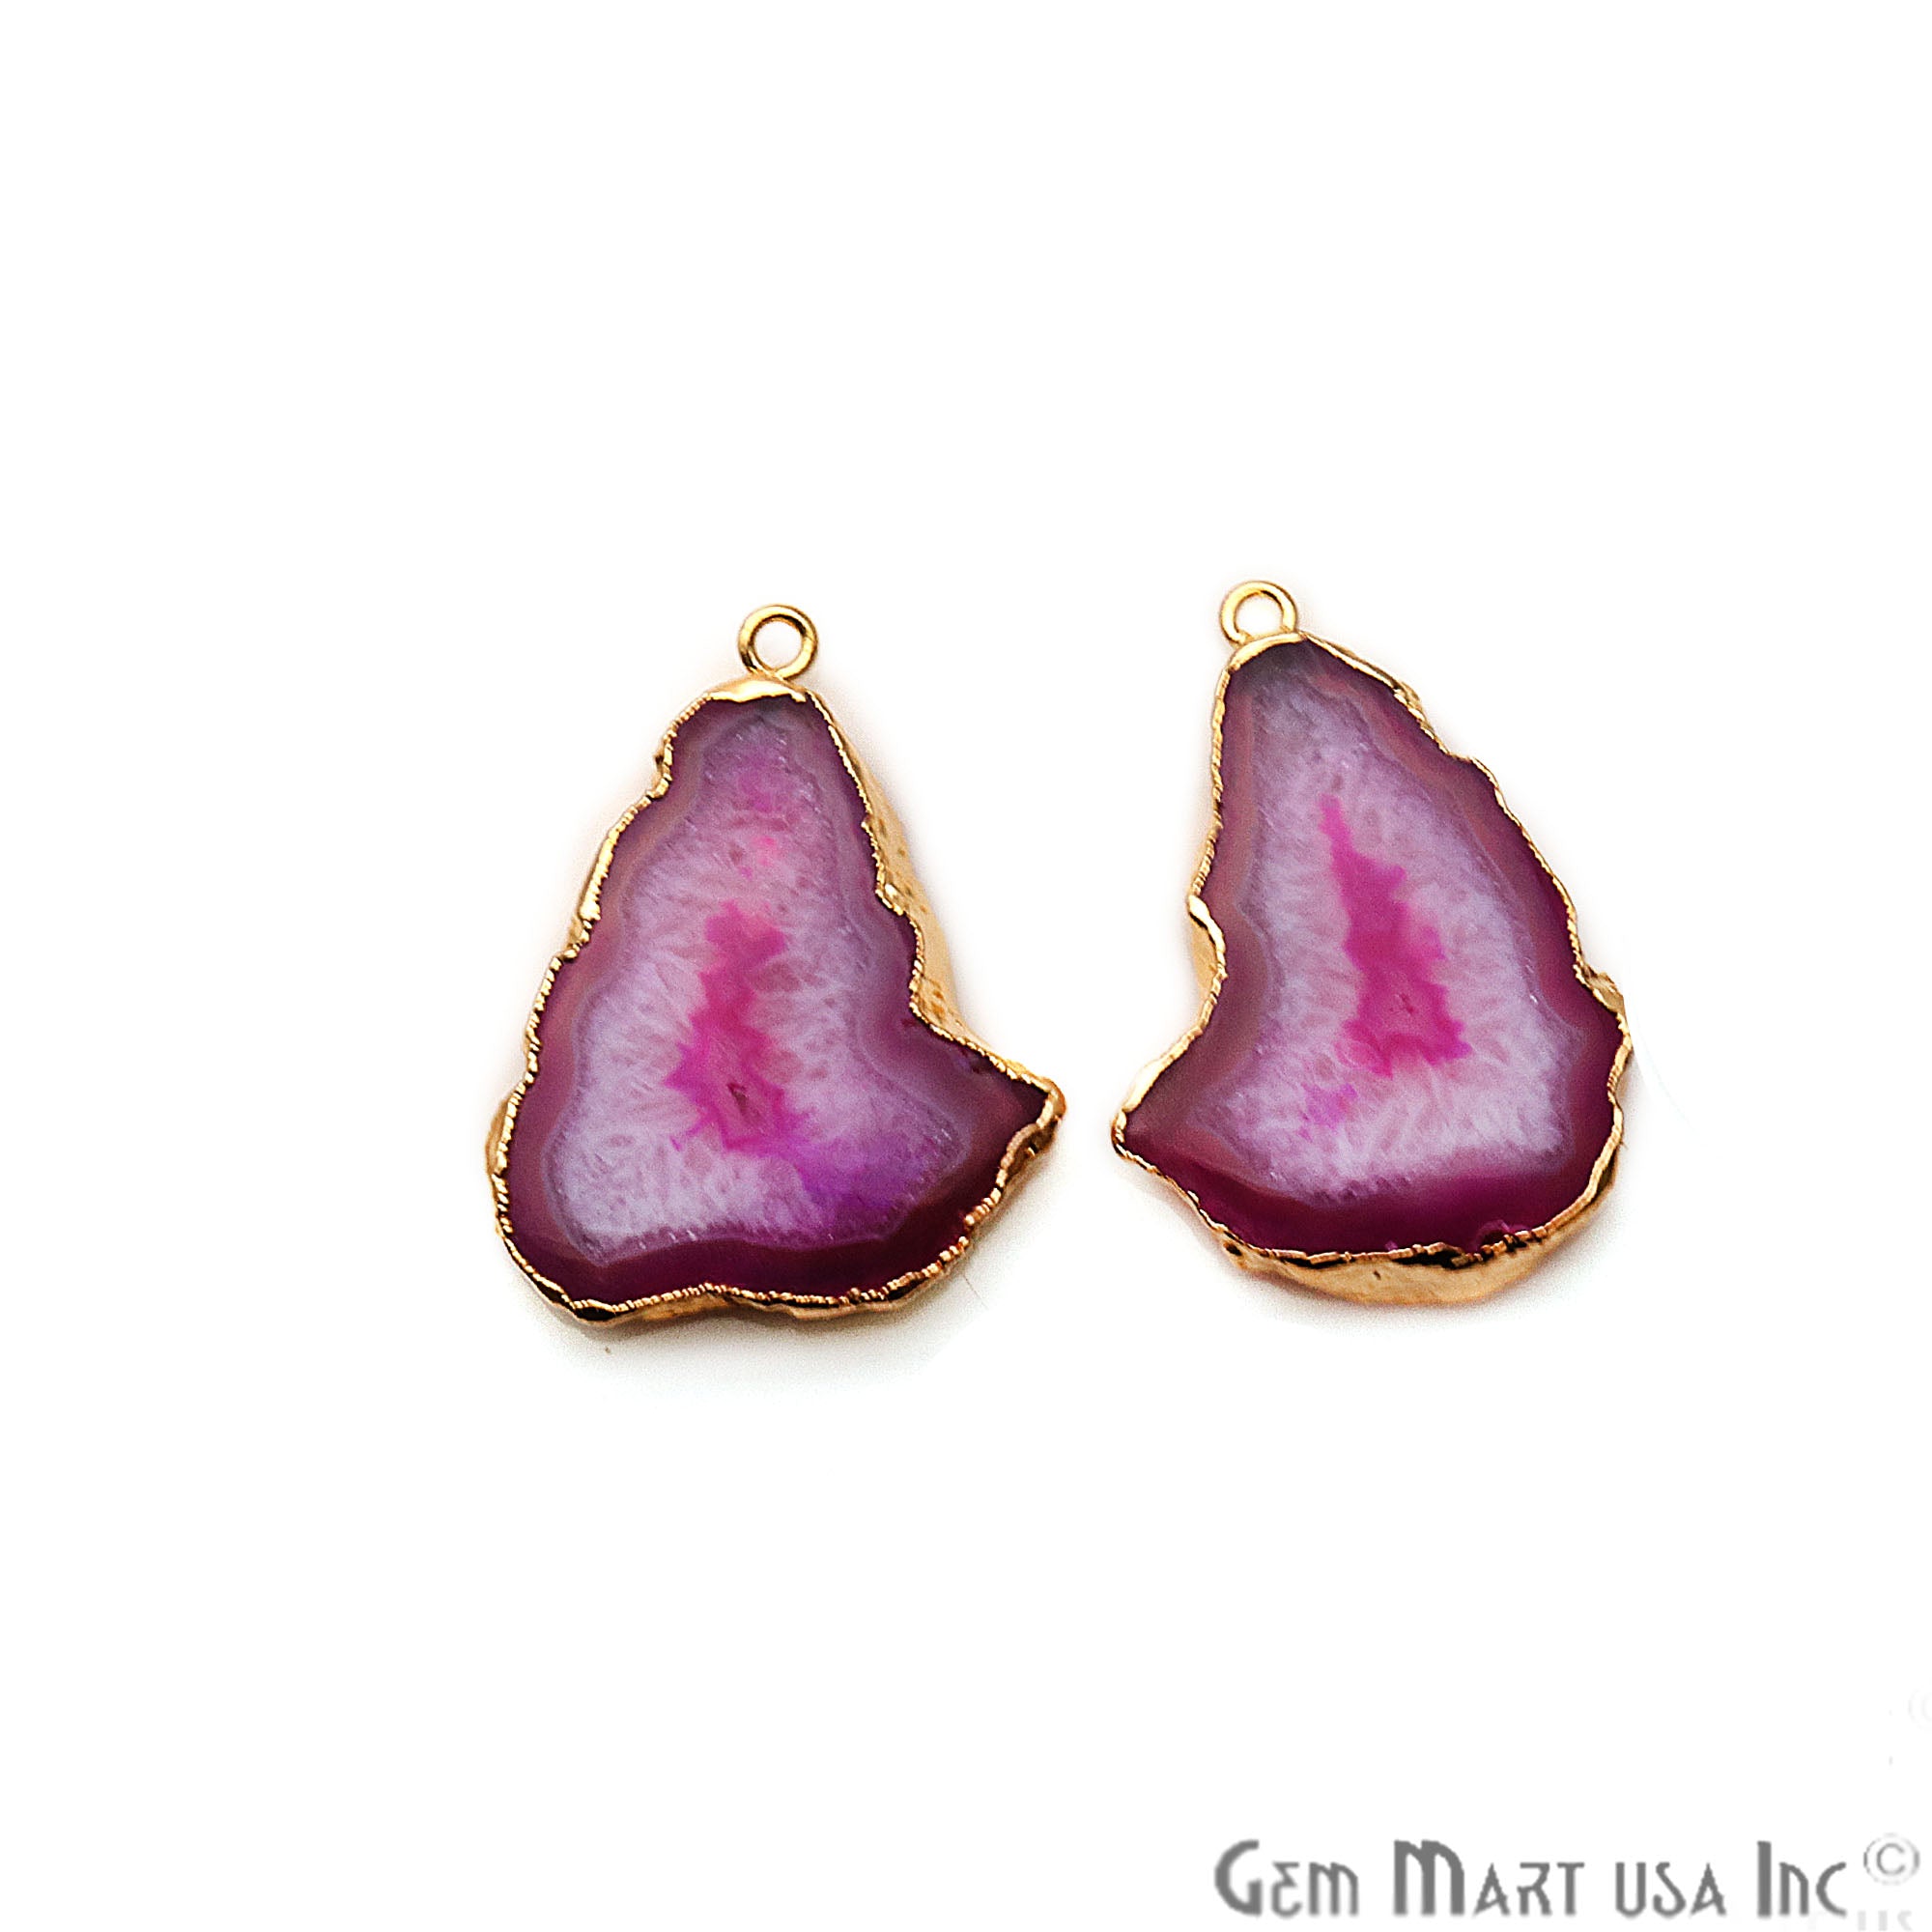 Agate Slice 25x24mm Organic Gold Electroplated Gemstone Earring Connector 1 Pair - GemMartUSA